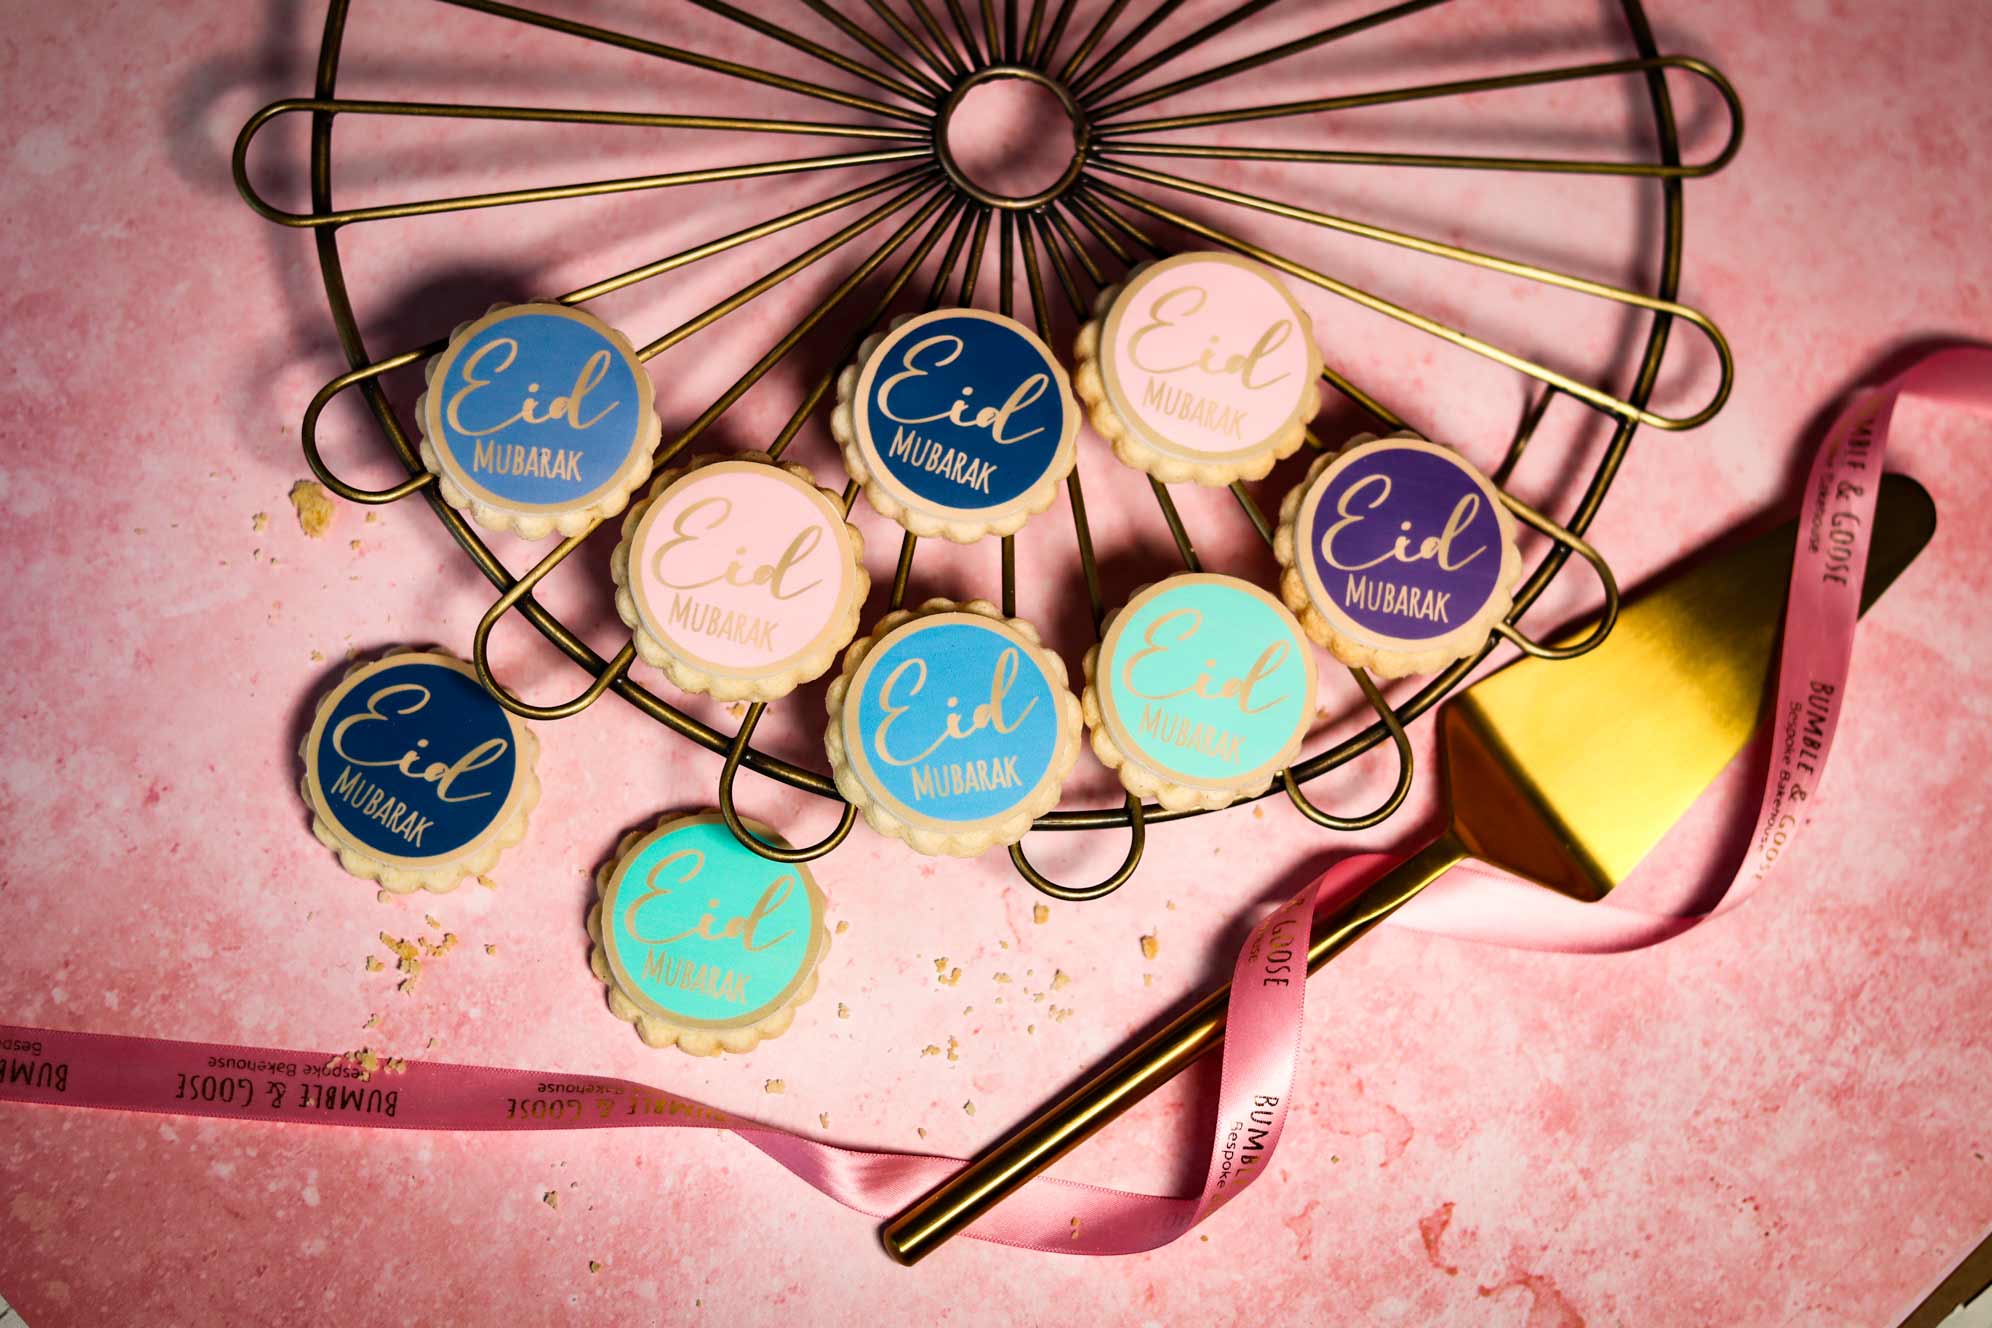 Eid Mubarak Biscuits – Individually wrapped Featured Image